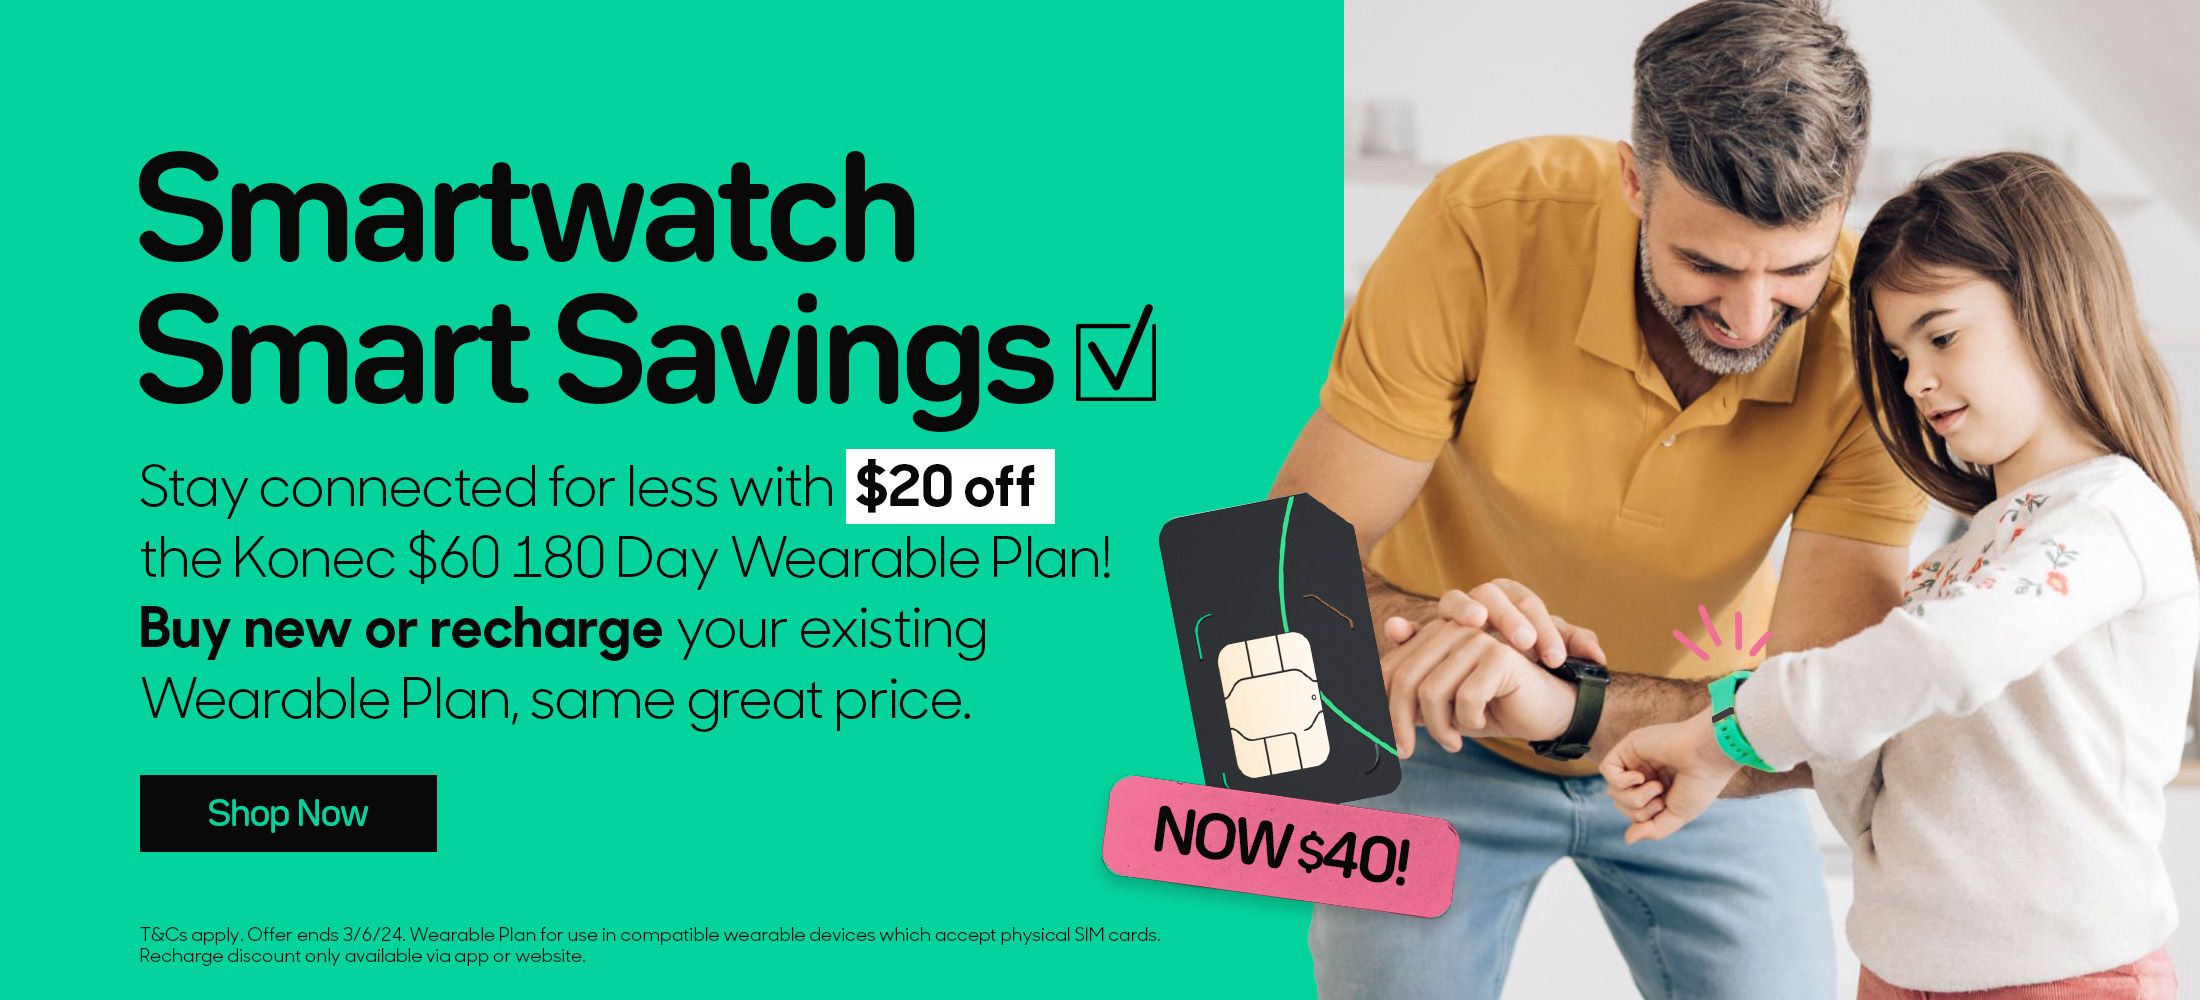 Stay connected for less with $20 off the Konec $60 180 Day Wearable Plan